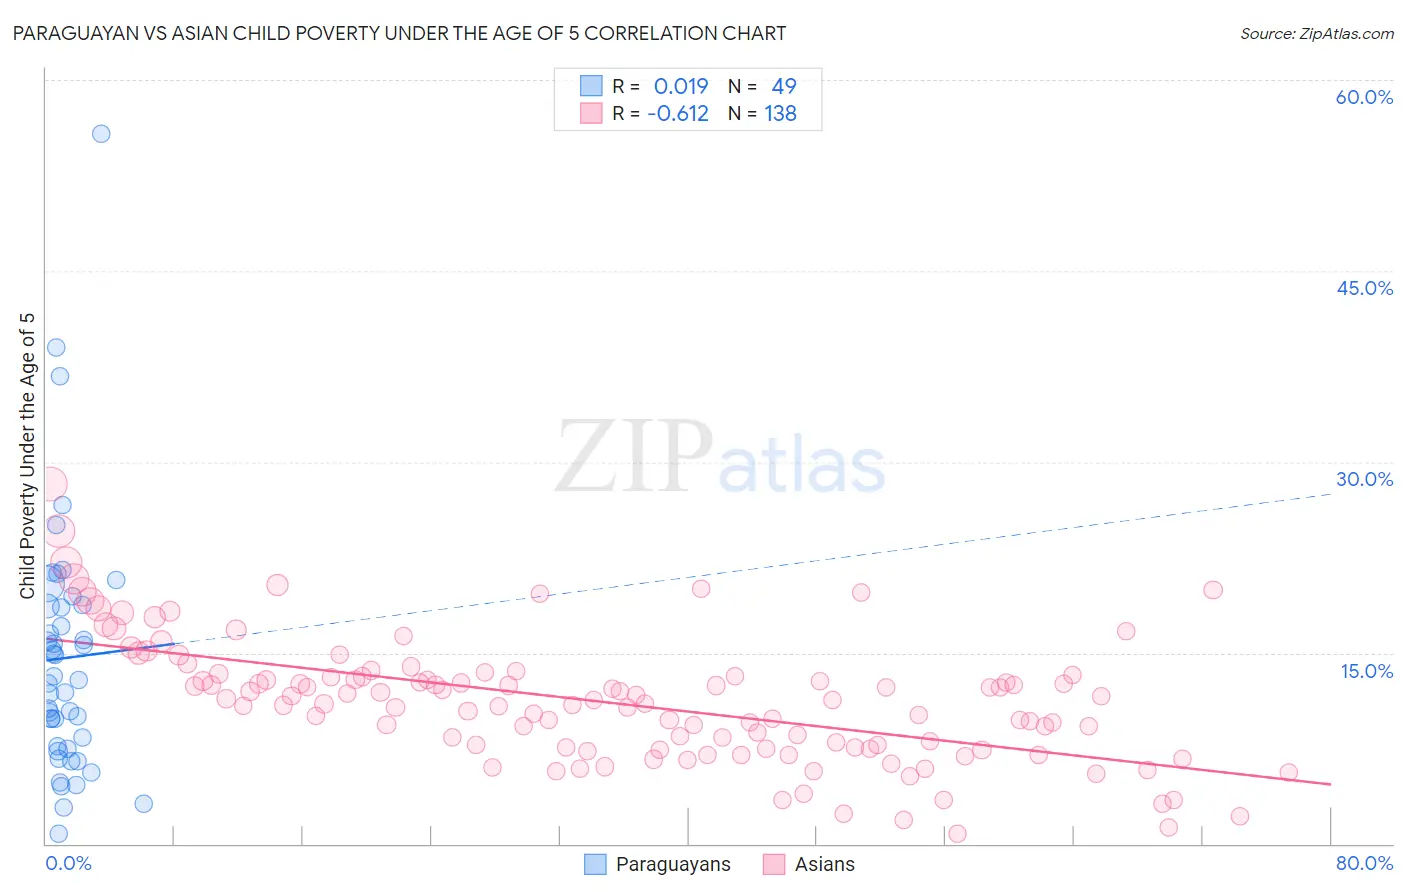 Paraguayan vs Asian Child Poverty Under the Age of 5